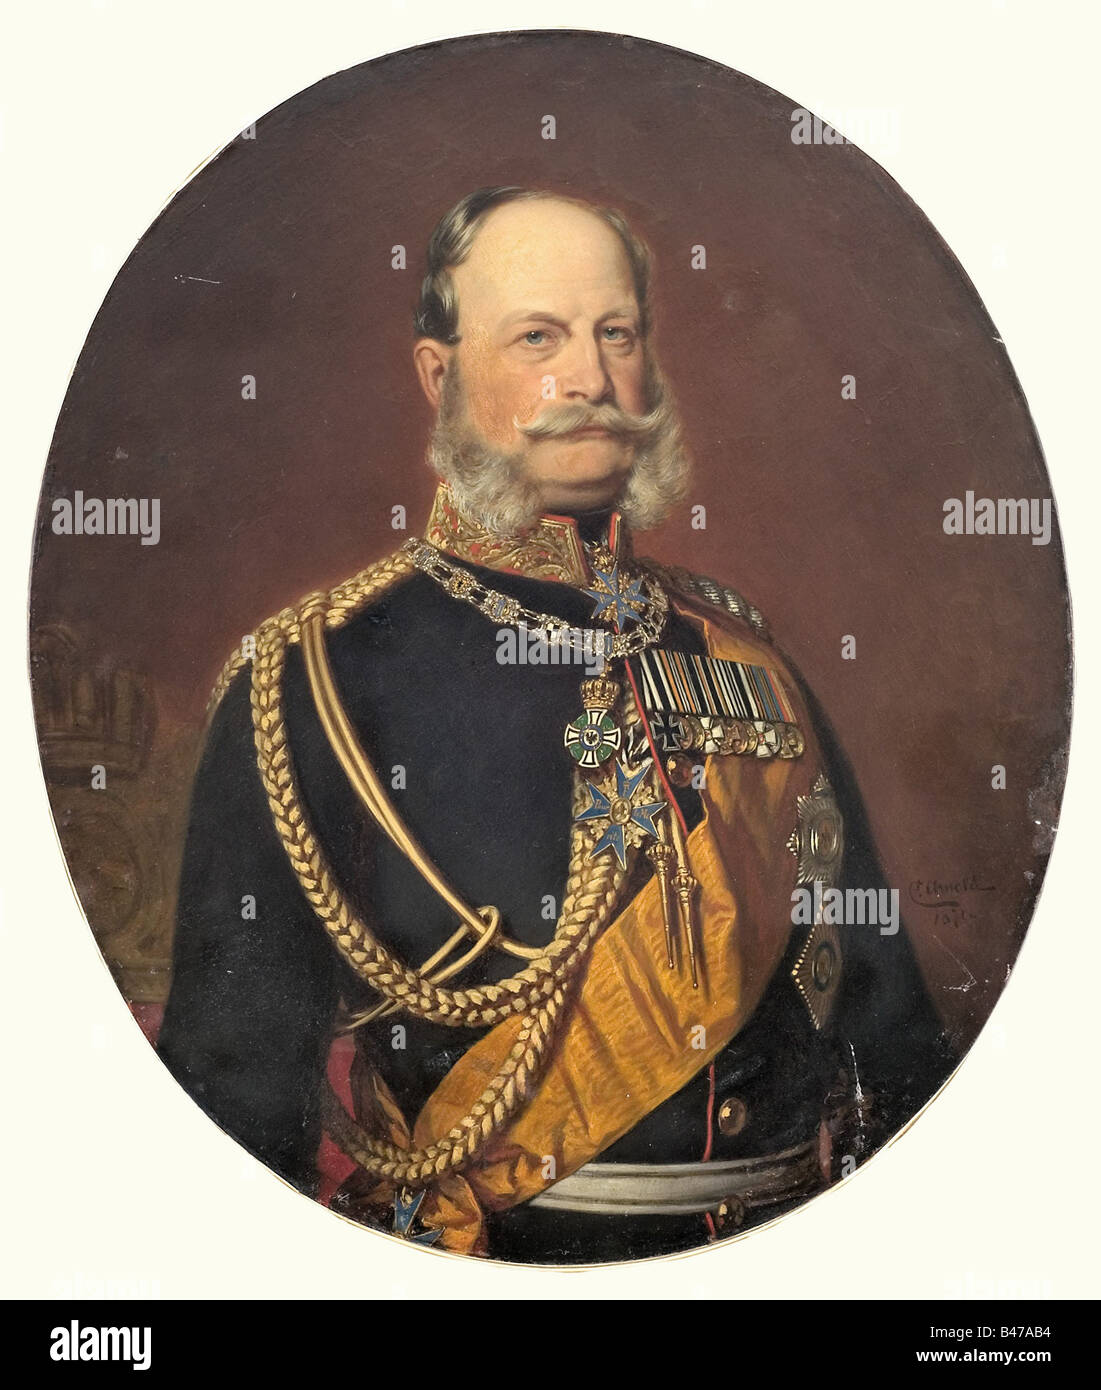 Kaiser Wilhelm I, a portrait by Carl Arnold, dated 1871 Oil on canvas, relined. The Kaiser in a general's uniform adorned with medals, facing the spectator. In the background a suggested architectural scenery. High oval stretcher frame with metal border bead and brocade braid. Four small restorations, traces of restoration on the right cheek. 90 x 76 cm. Arnold (1829 - 1916) studied under Menzel in Berlin, as well as in Kassel and Antwerp. There is another portrait by the artist showing the Kaiser in his coronation coat, which must have been painted at the same, Stock Photo